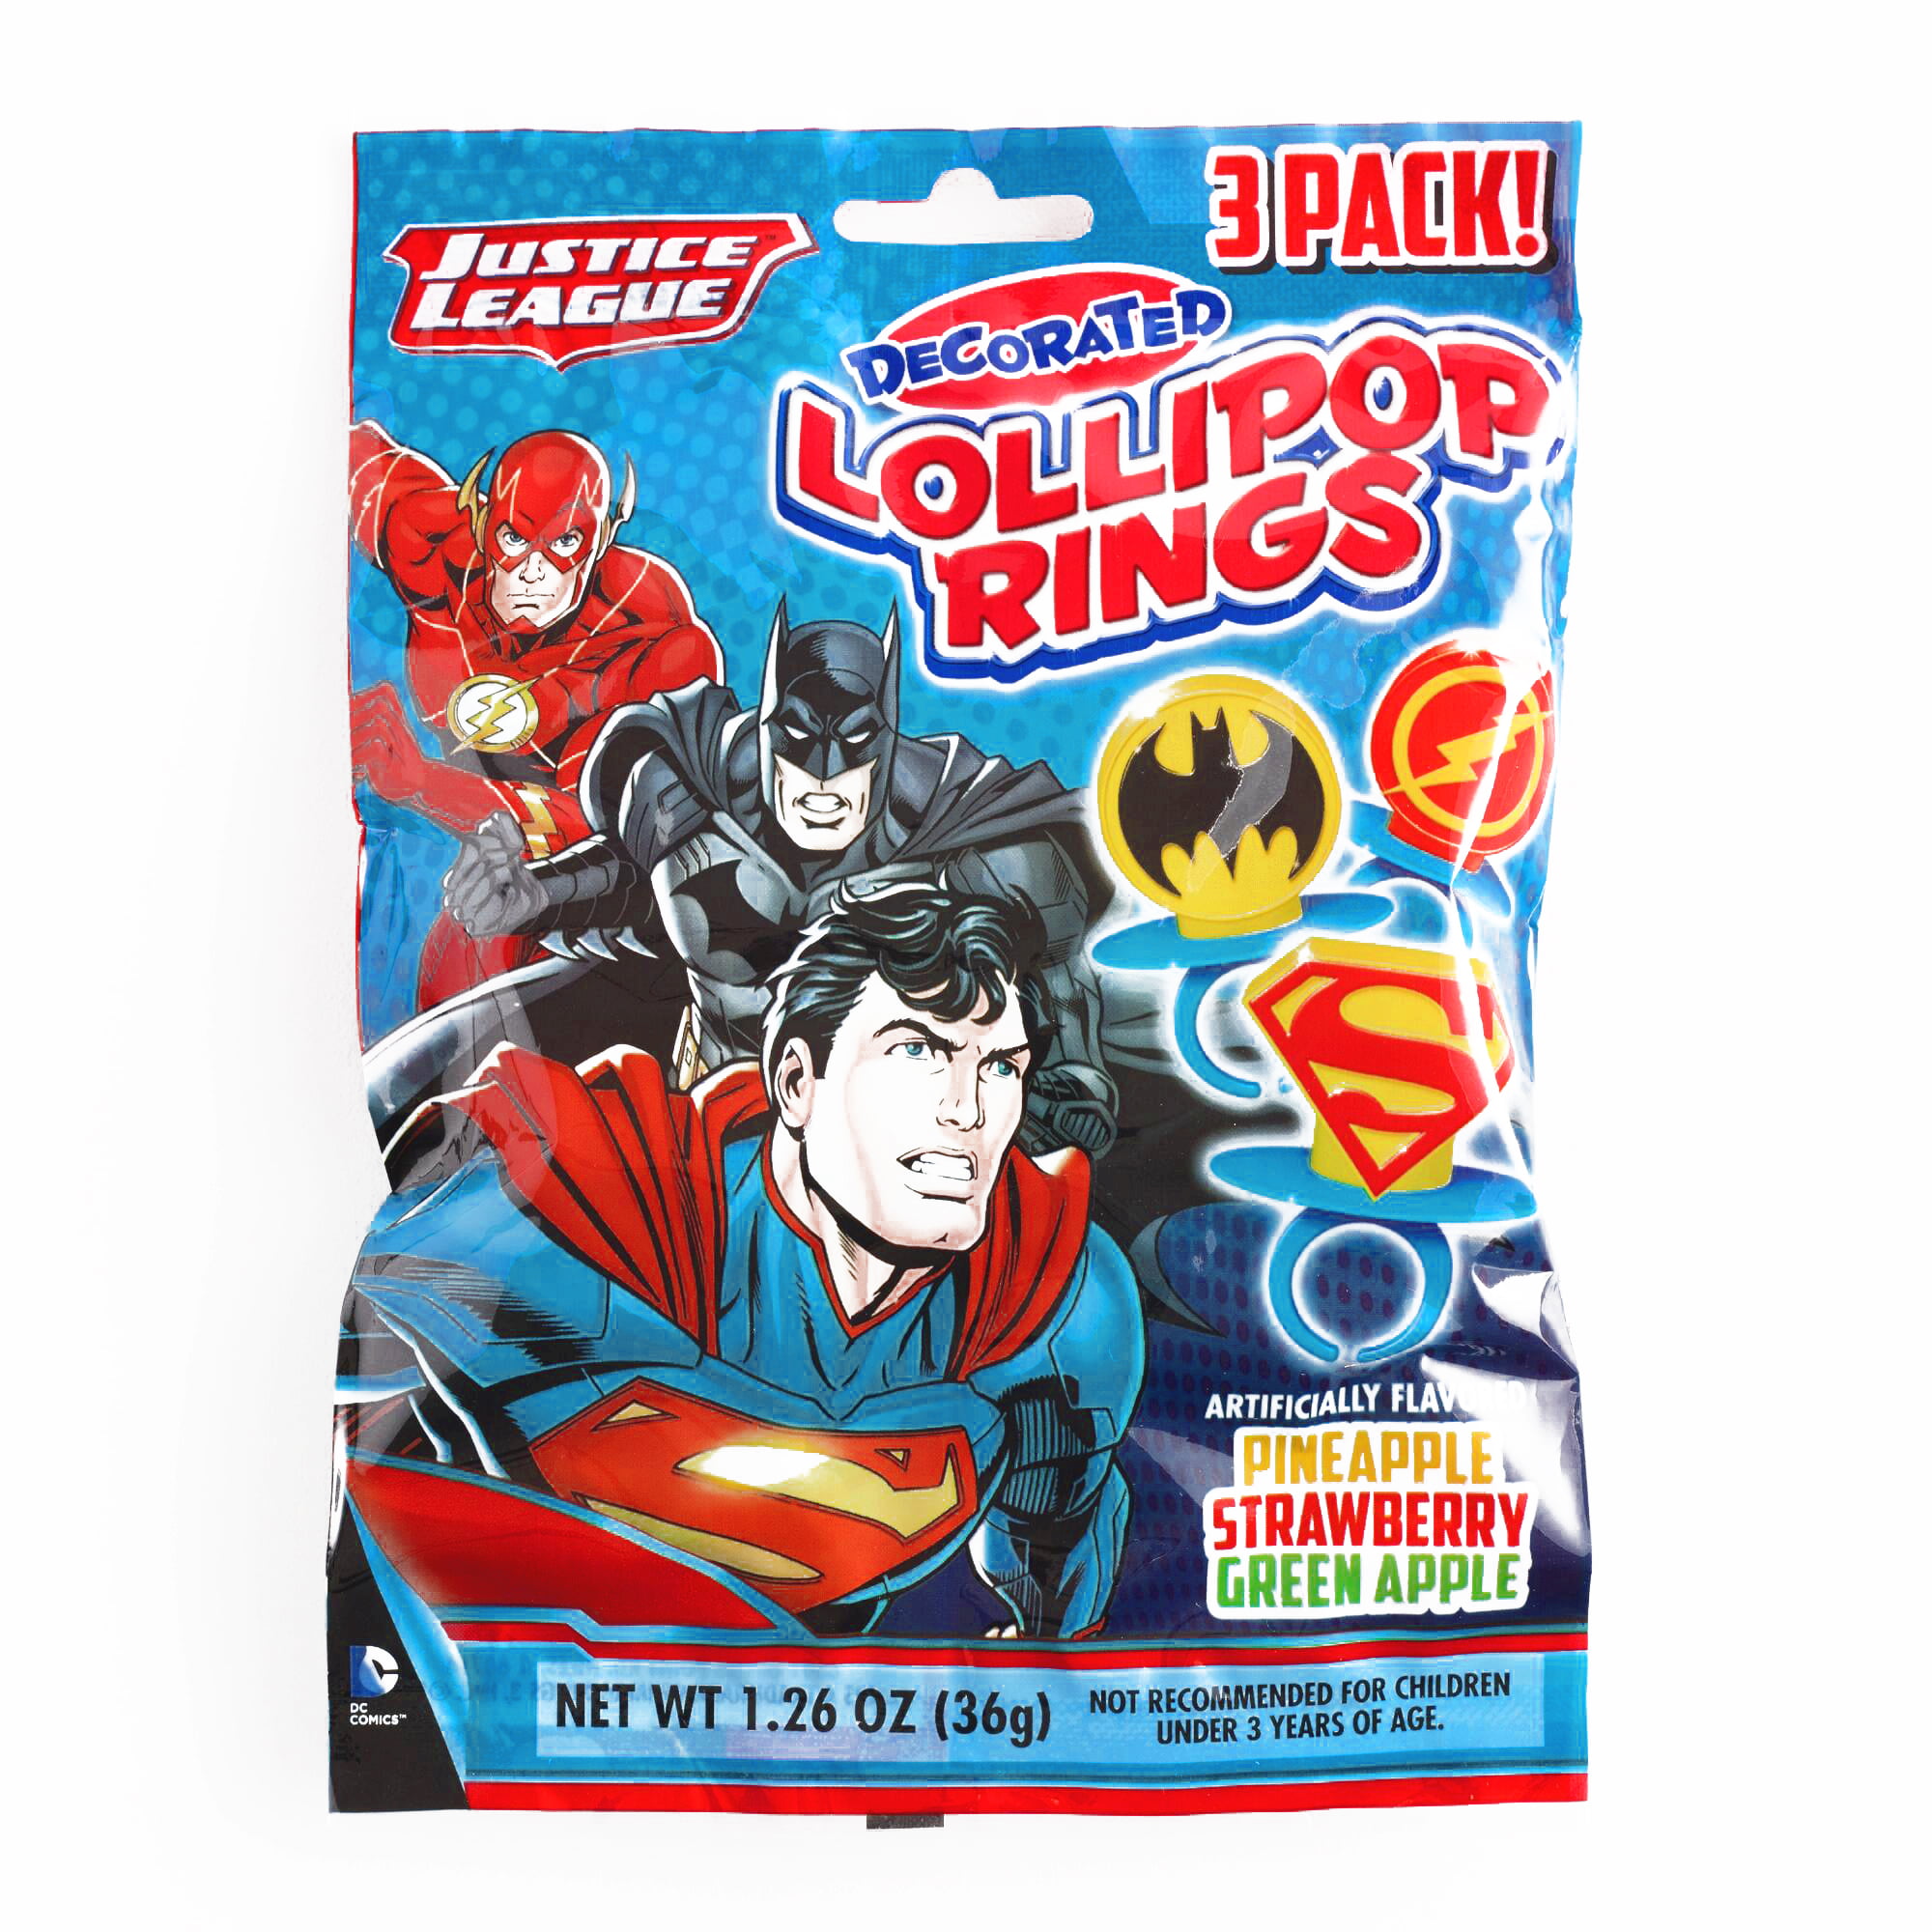 Dc comics originals Superman coin bank  milky candy lolly pops buy 1 get 1 free 